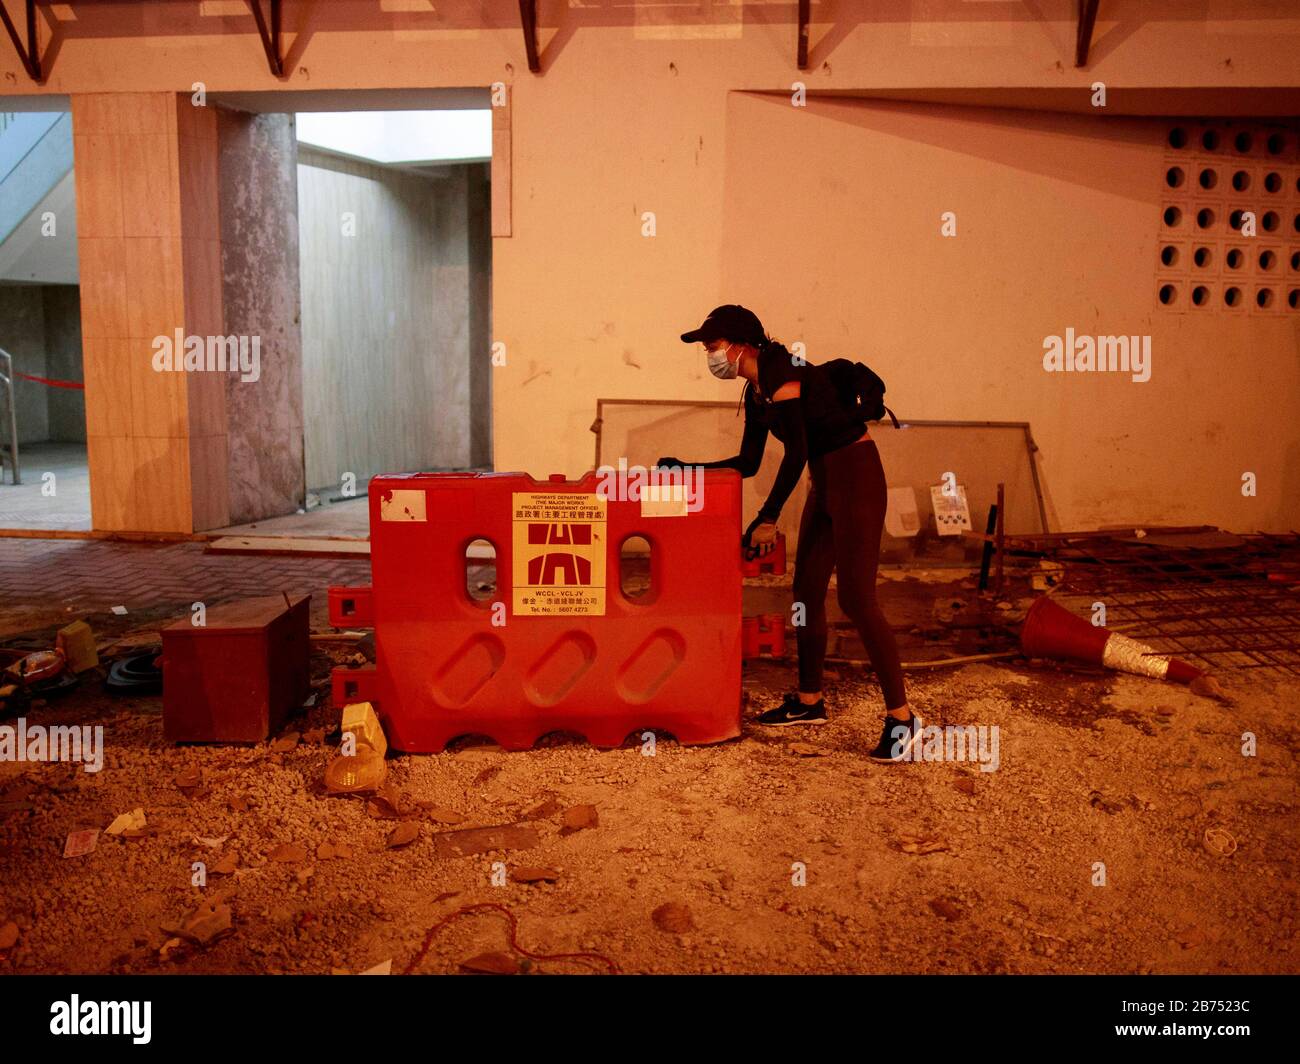 A protester build barricade after a rally. Hundreds of people gather to protest a high school student shot with live round by police yesterday 1 Oct 2019. Some protesters later set the gate of a police station on fire in Hong Kong. Stock Photo